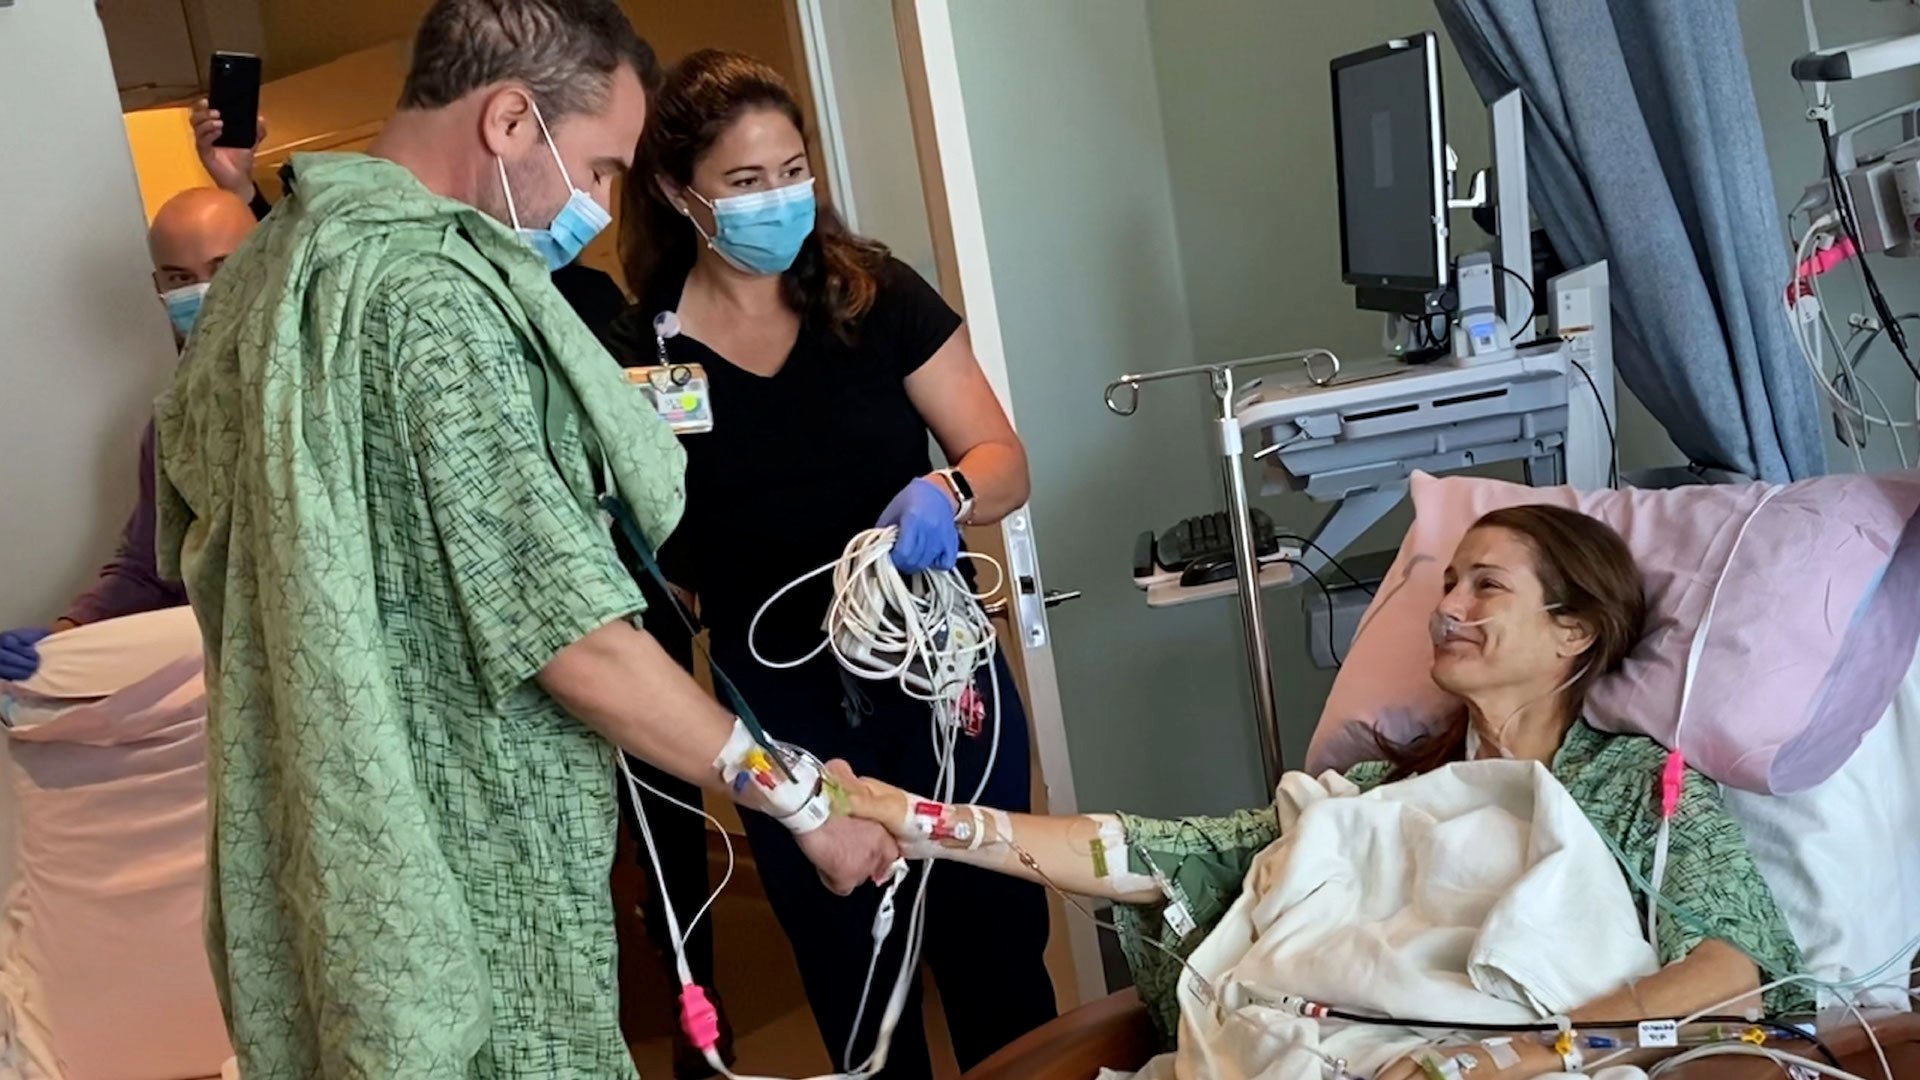 man who donated part of liver (right) shakes hands with patient lying in bed who received it as nurse (middle) watches in hospital room